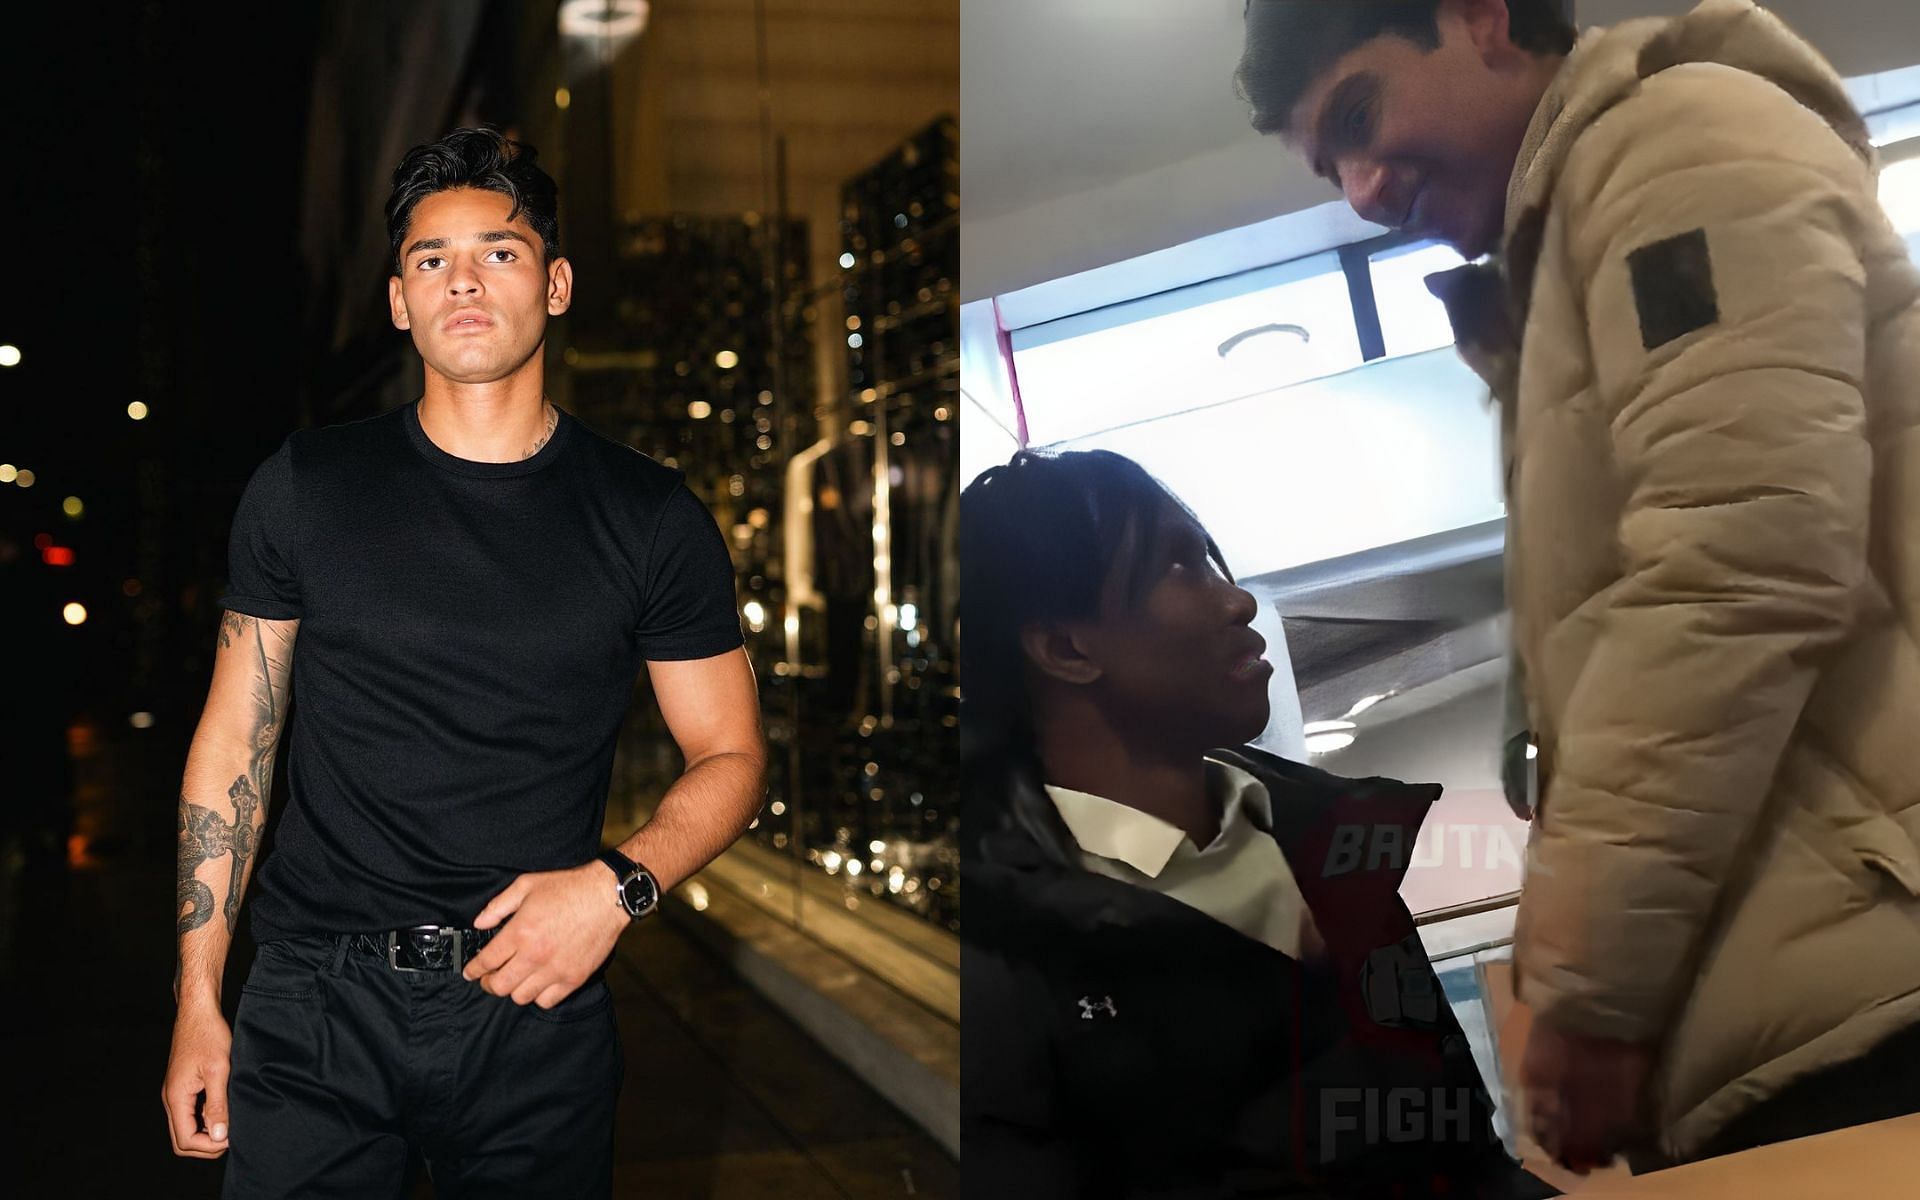 Ryan Garcia (left) expresses sympathy for the student being bullied (right) [Images courtesy: @kingryan on Instagram and @brutalfightz on X]